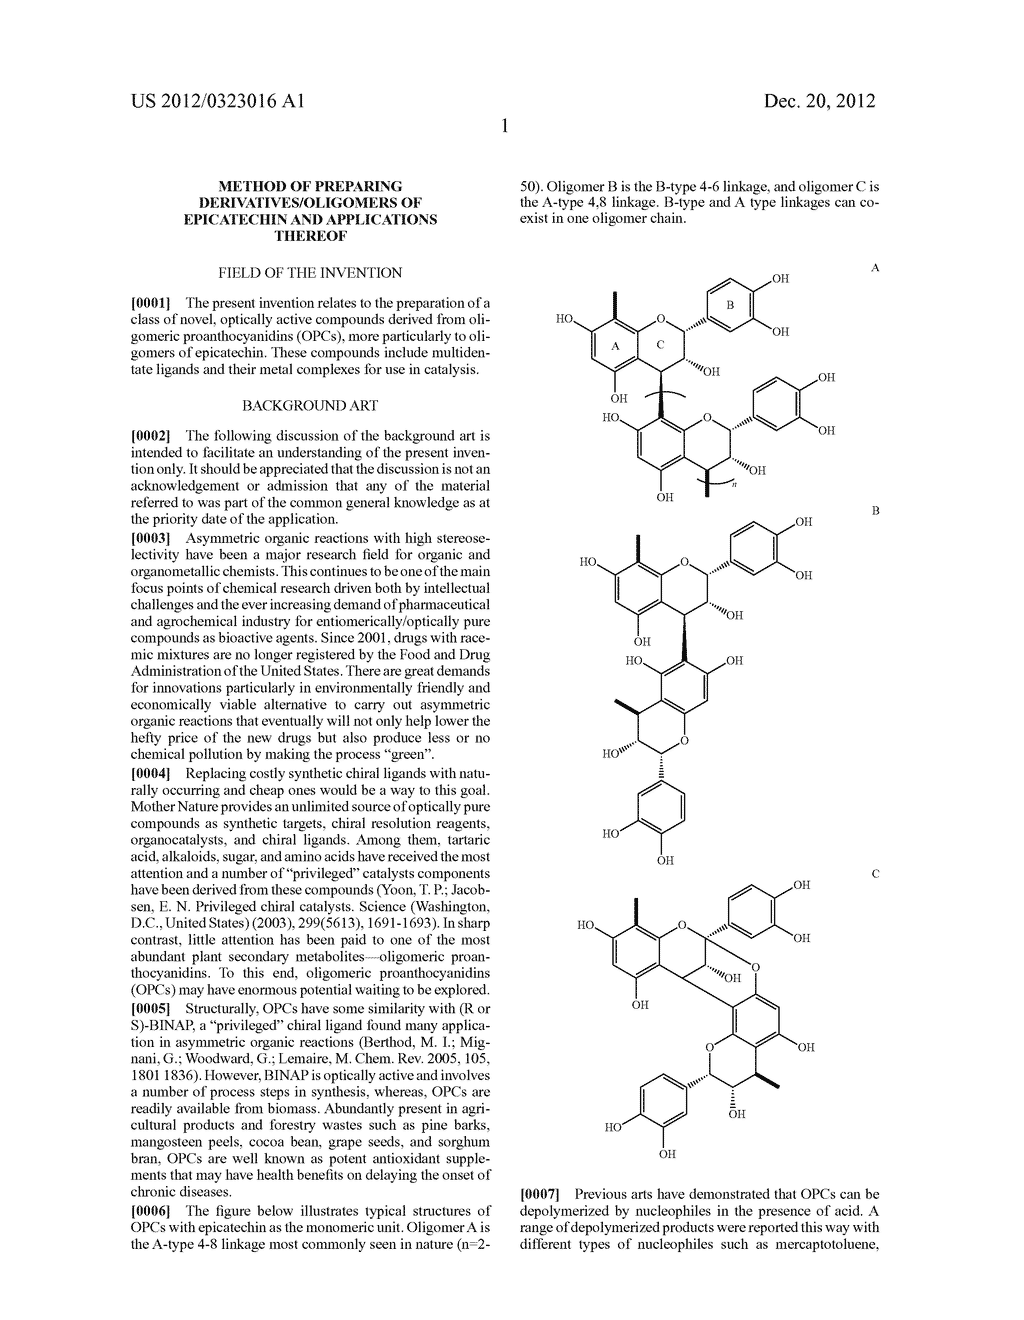 METHOD OF PREPARING DERIVATIVES/OLIGOMERS OF EPICATECHIN AND APPLICATIONS     THEREOF - diagram, schematic, and image 07